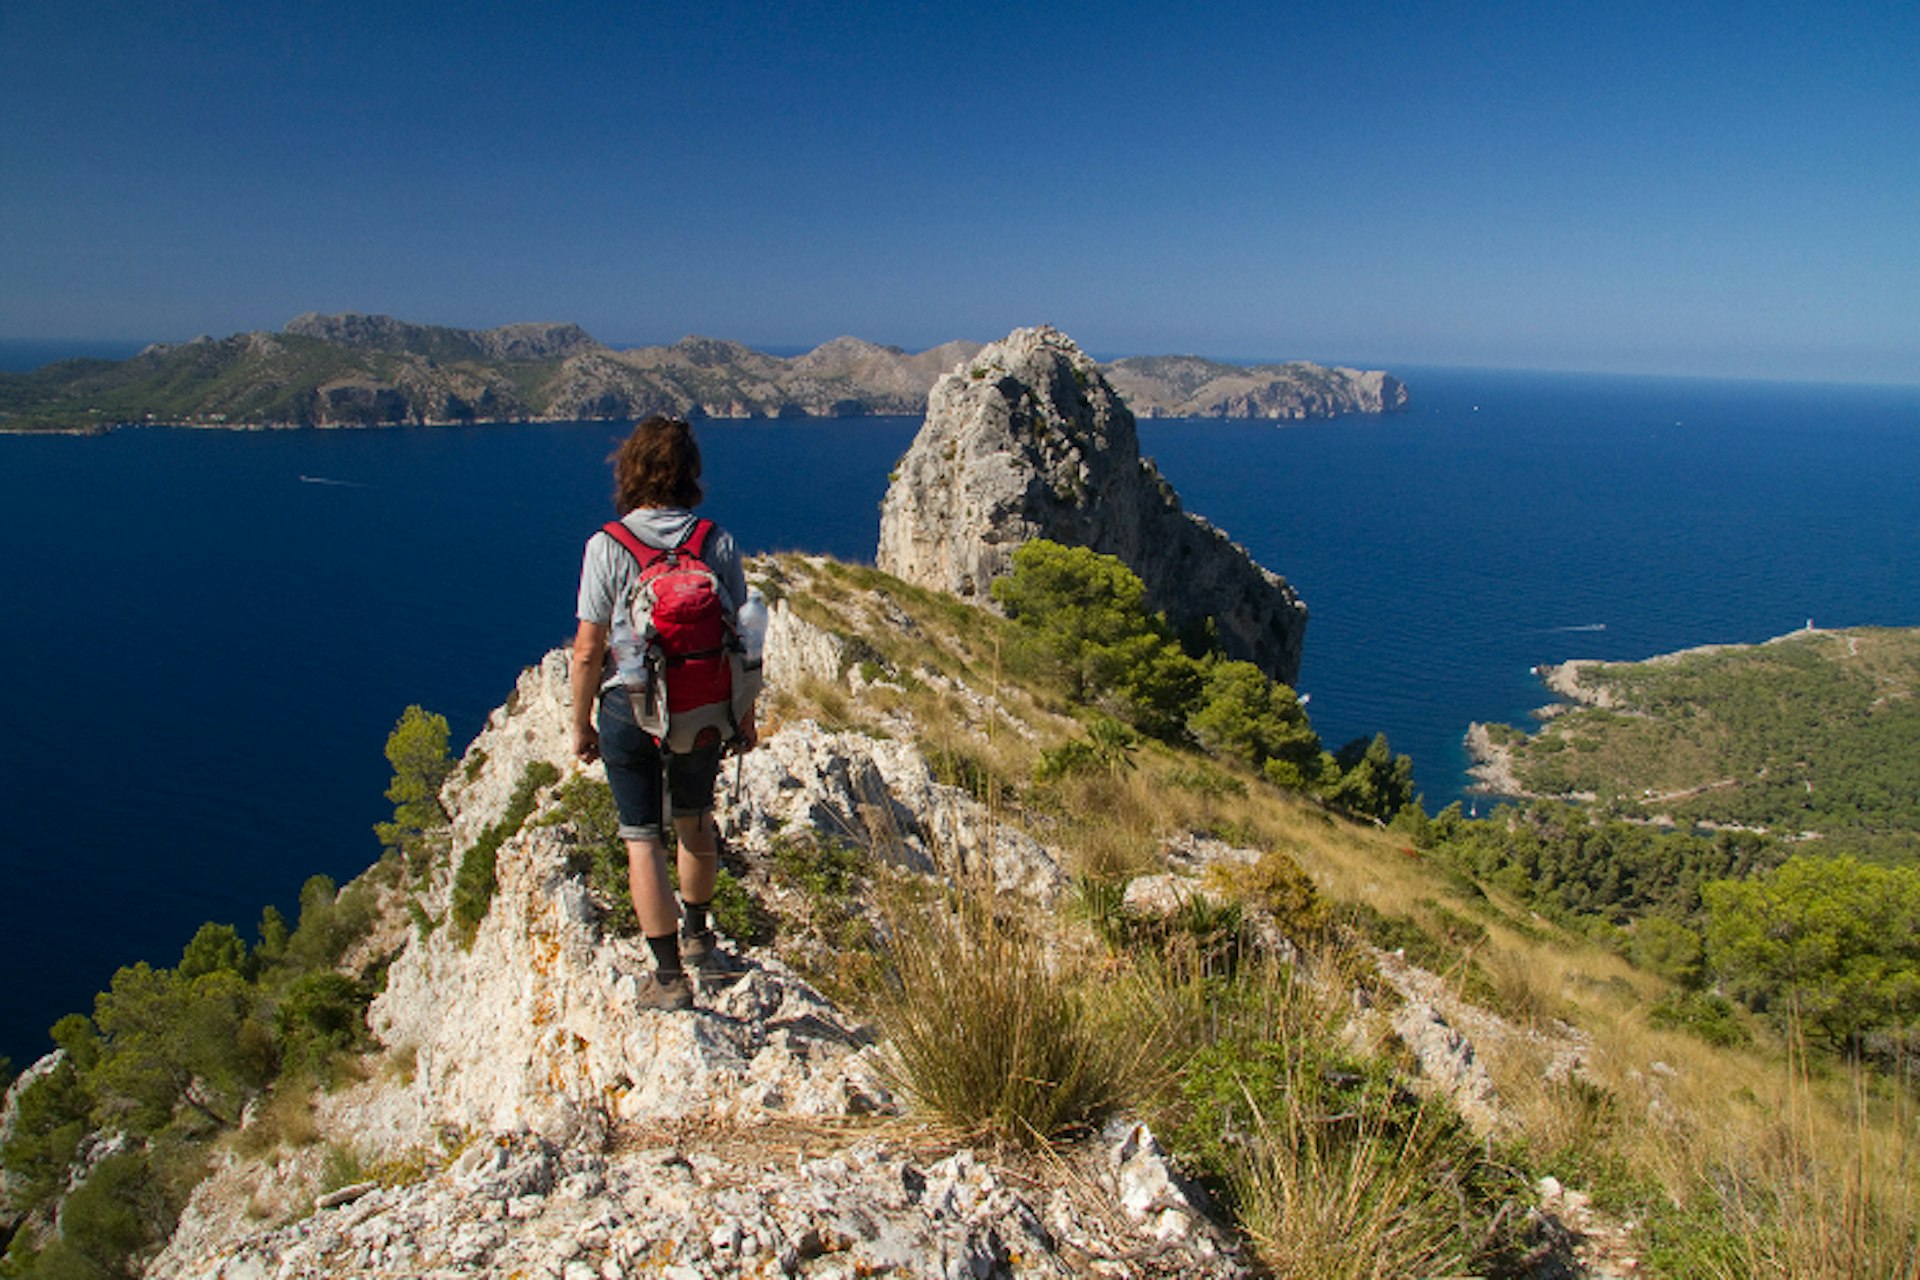 The coastal trails on the Cap de Pinar peninsula. Image by Kerry Christiani / Lonely Planet